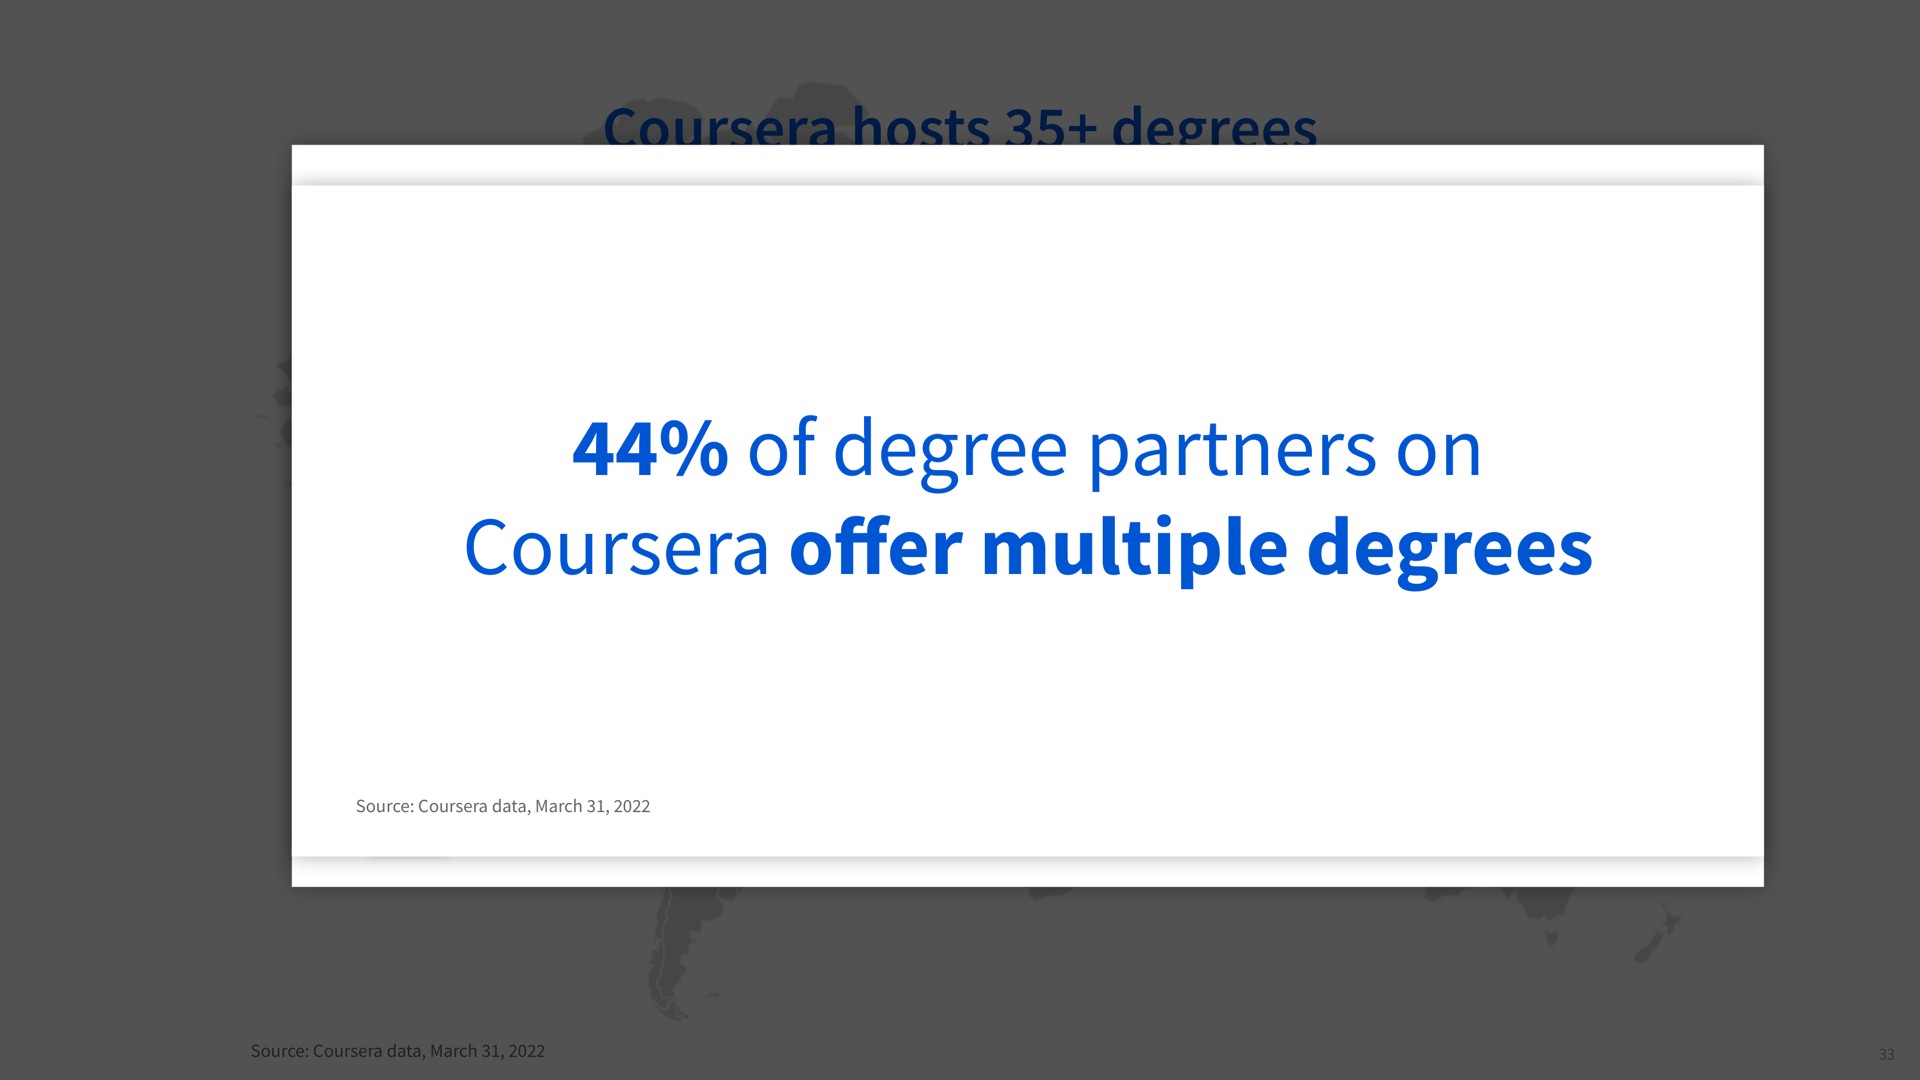 hosts degrees added degree programs in the last year cat chile master in global public health queen mary university of master of science in applied data analytics cat chile master of investment and applied finance namer degrees cat chile master of data science of degree partners on multiple degrees degrees university of north bachelor of science in general business university of colorado boulder master of engineering in engineering management degrees cat chile master of business analytics university of business administration tec master in business management degrees statistical institute postgraduate diploma in applied statistics university of master of science in security offer | Coursera